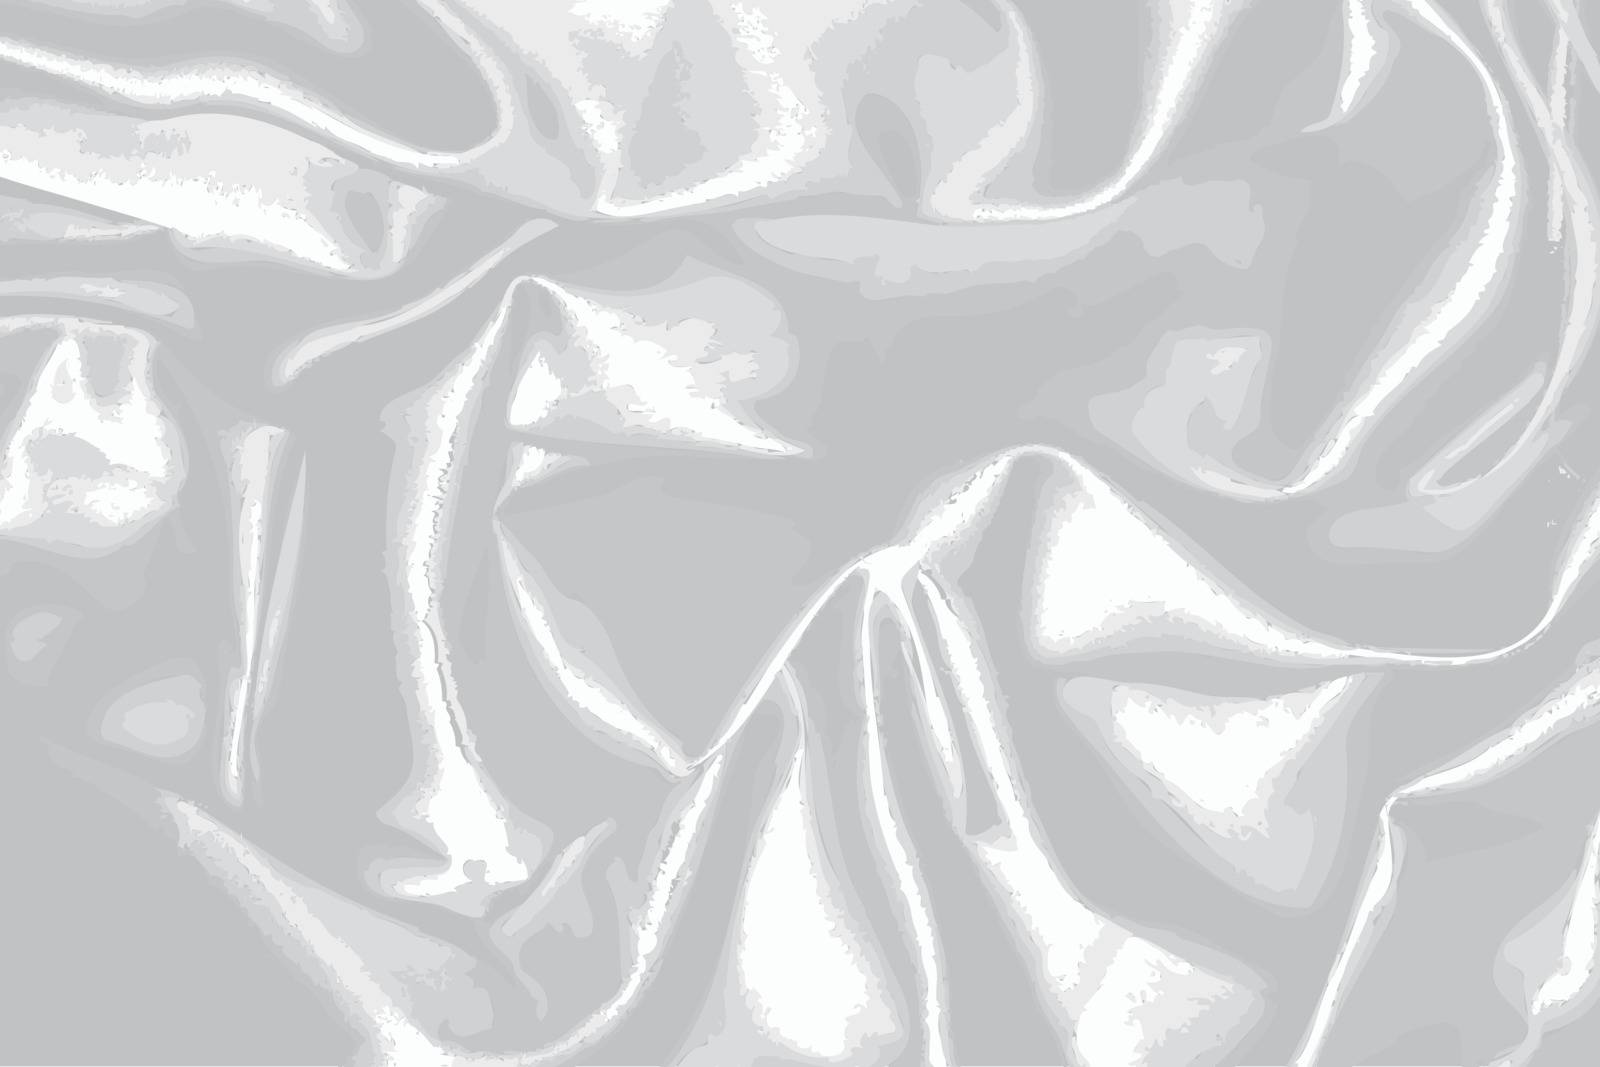 A typical white silk background with folds